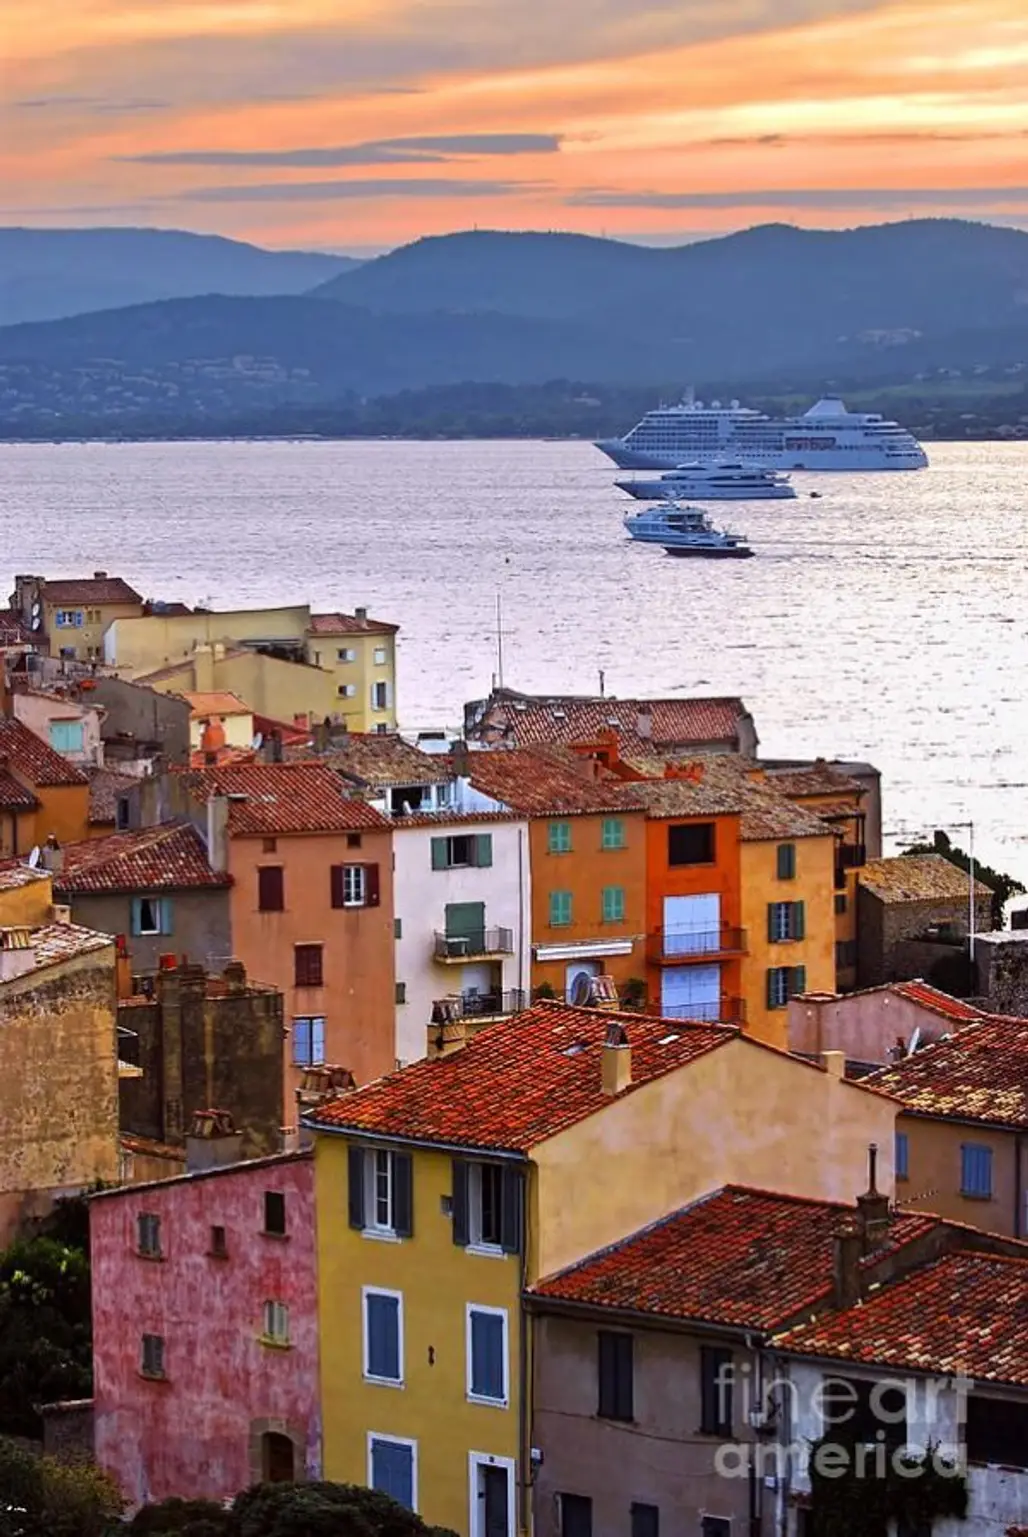 Get a Taste of the French Riviera